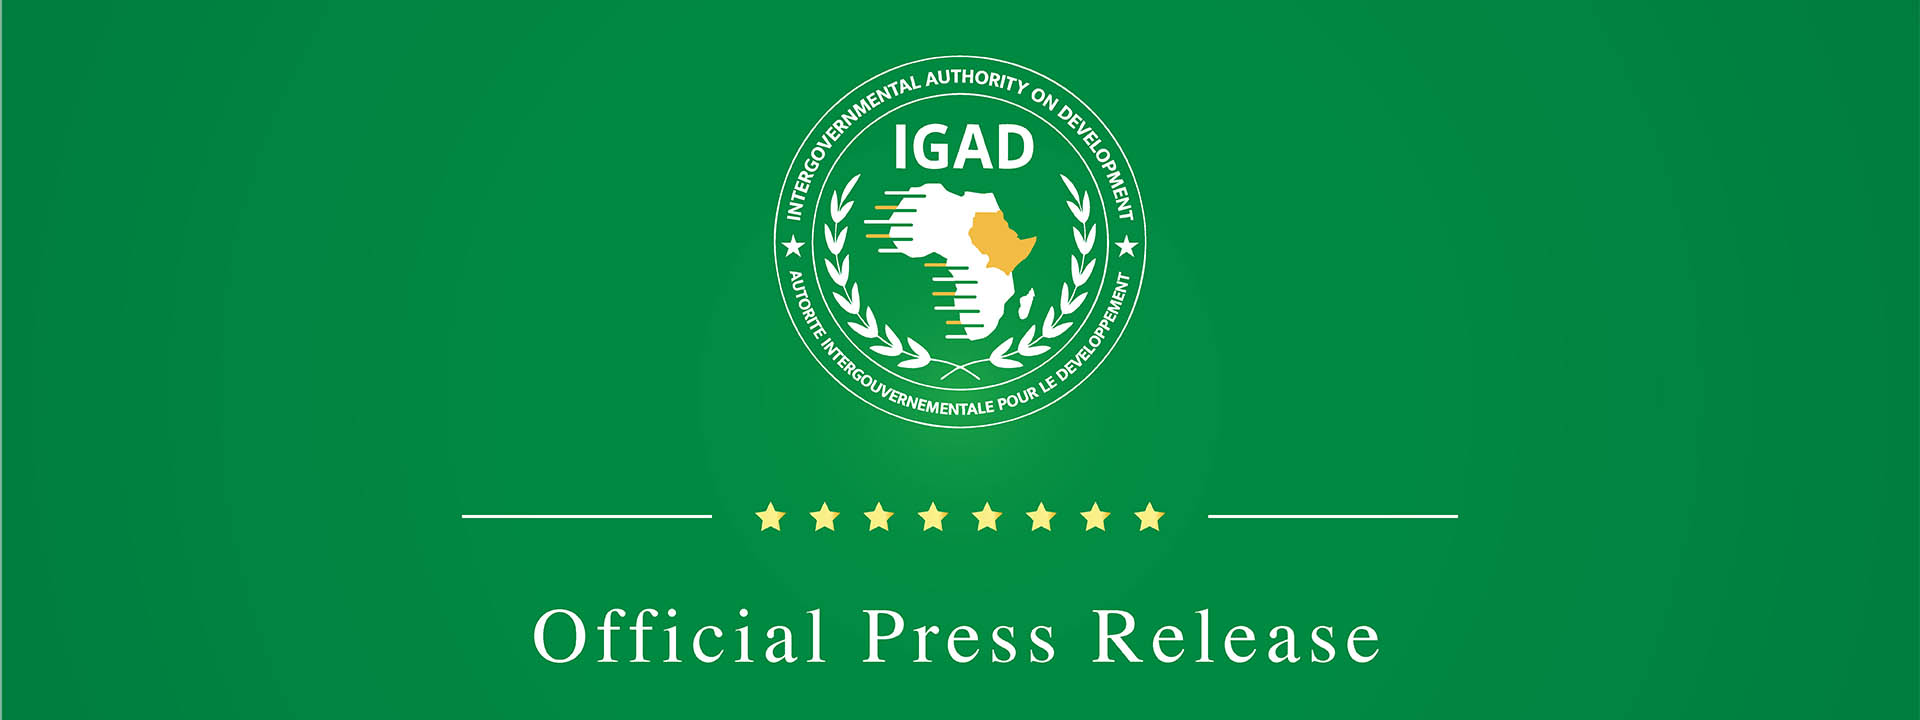 IGAD Executive Secretary is Pleased to Announce the Forthcoming Deployment of an IGAD EOM to Kenya Elections